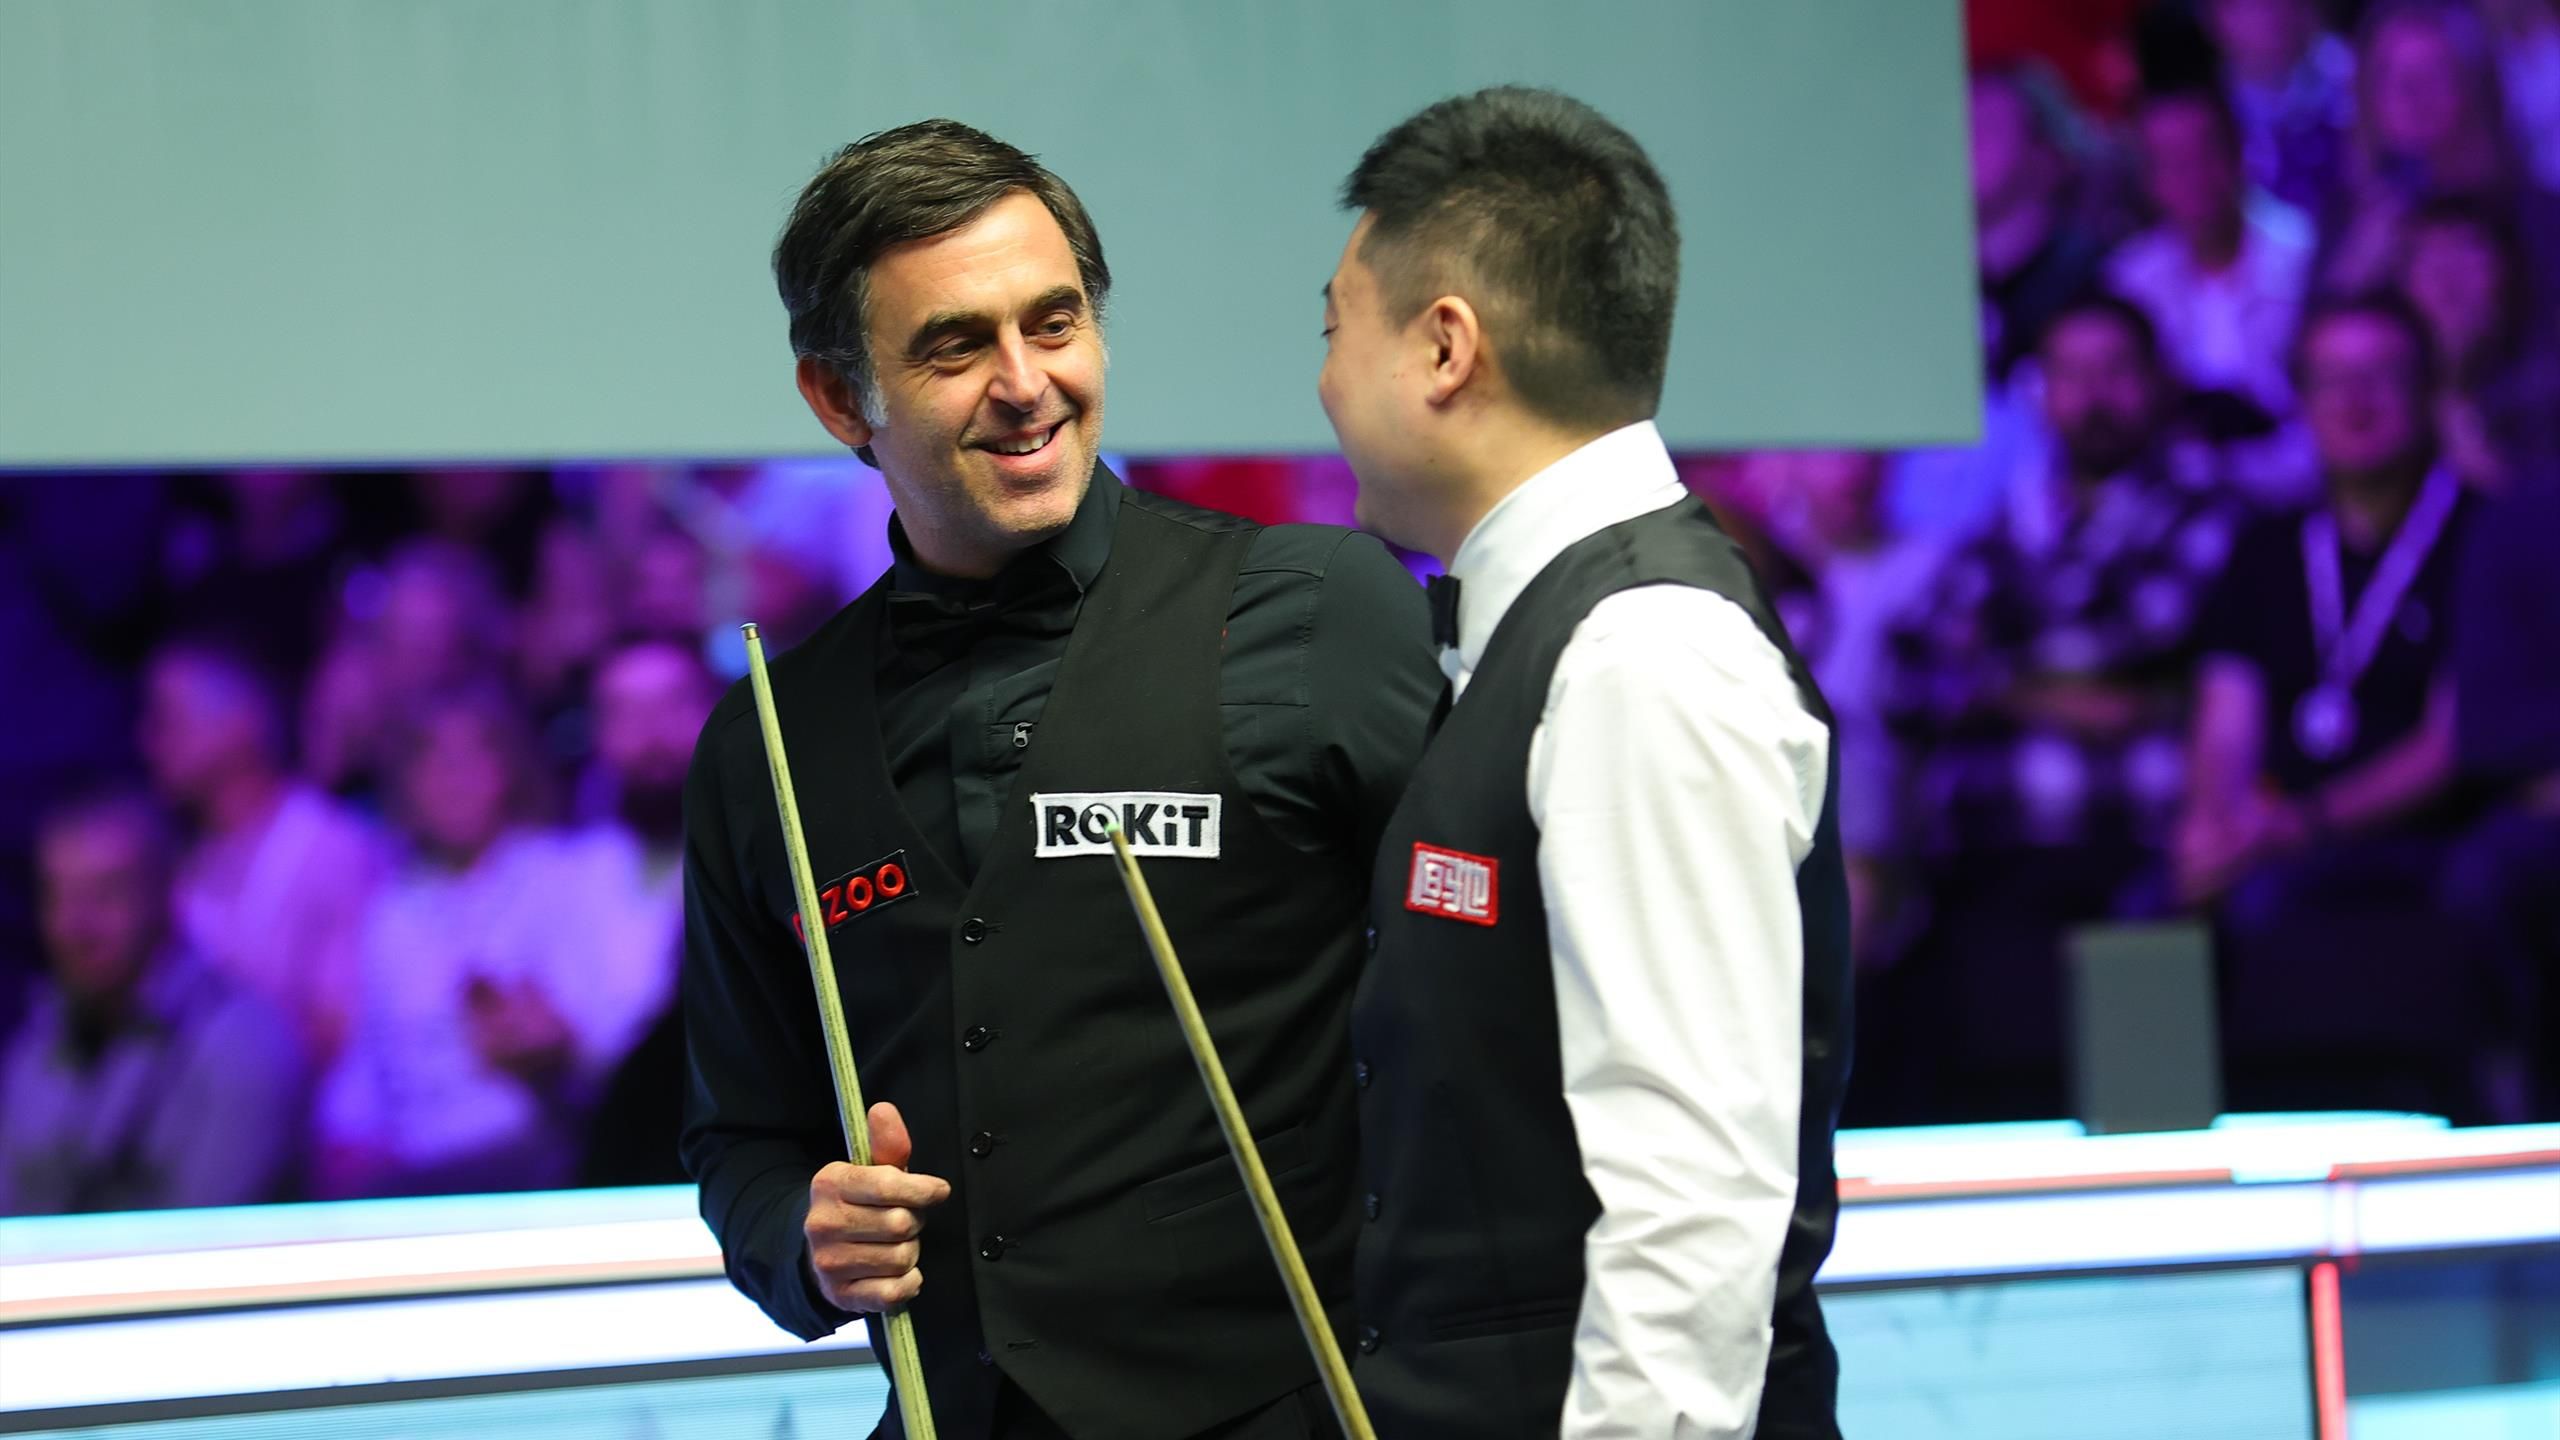 Scottish Open snooker 2022 - Latest scores, results, schedule, order of play, Ronnie OSullivan, Judd Trump in action